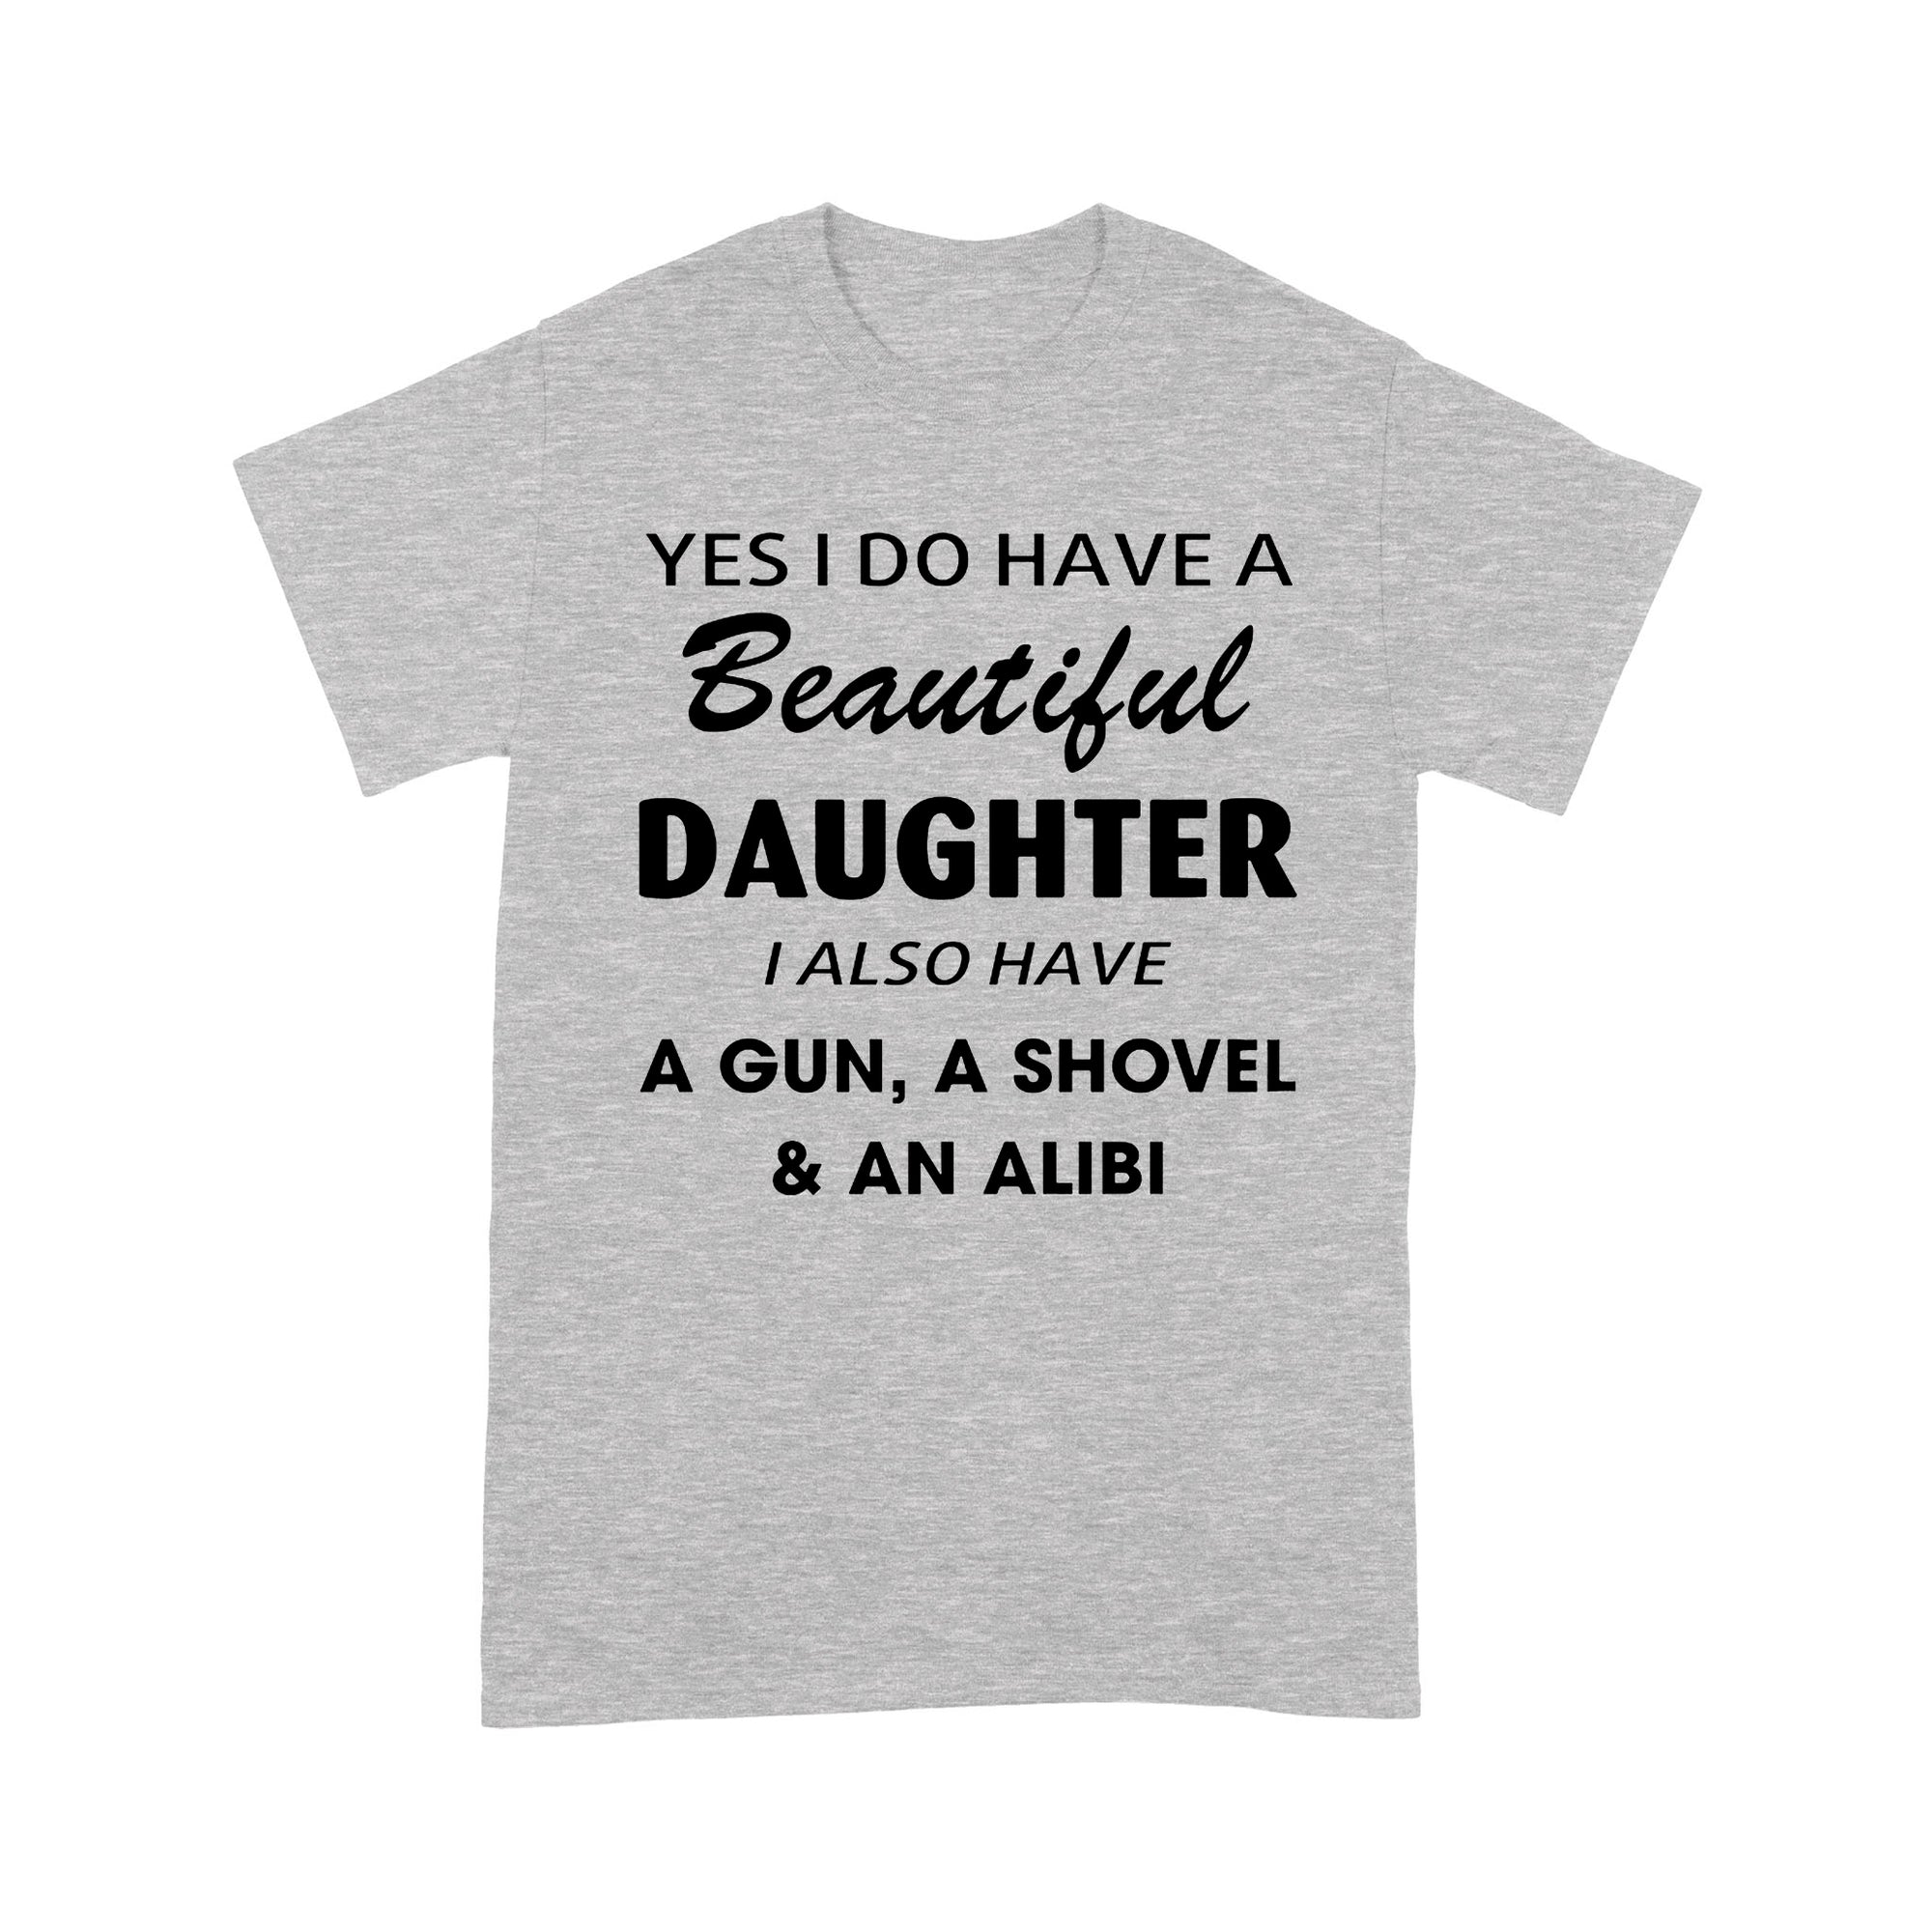 Gift Ideas for Dad Yes I Do Have A Beautiful Daughter I Also Have A Gun, A Shovel and An Alibi - Standard T-shirt